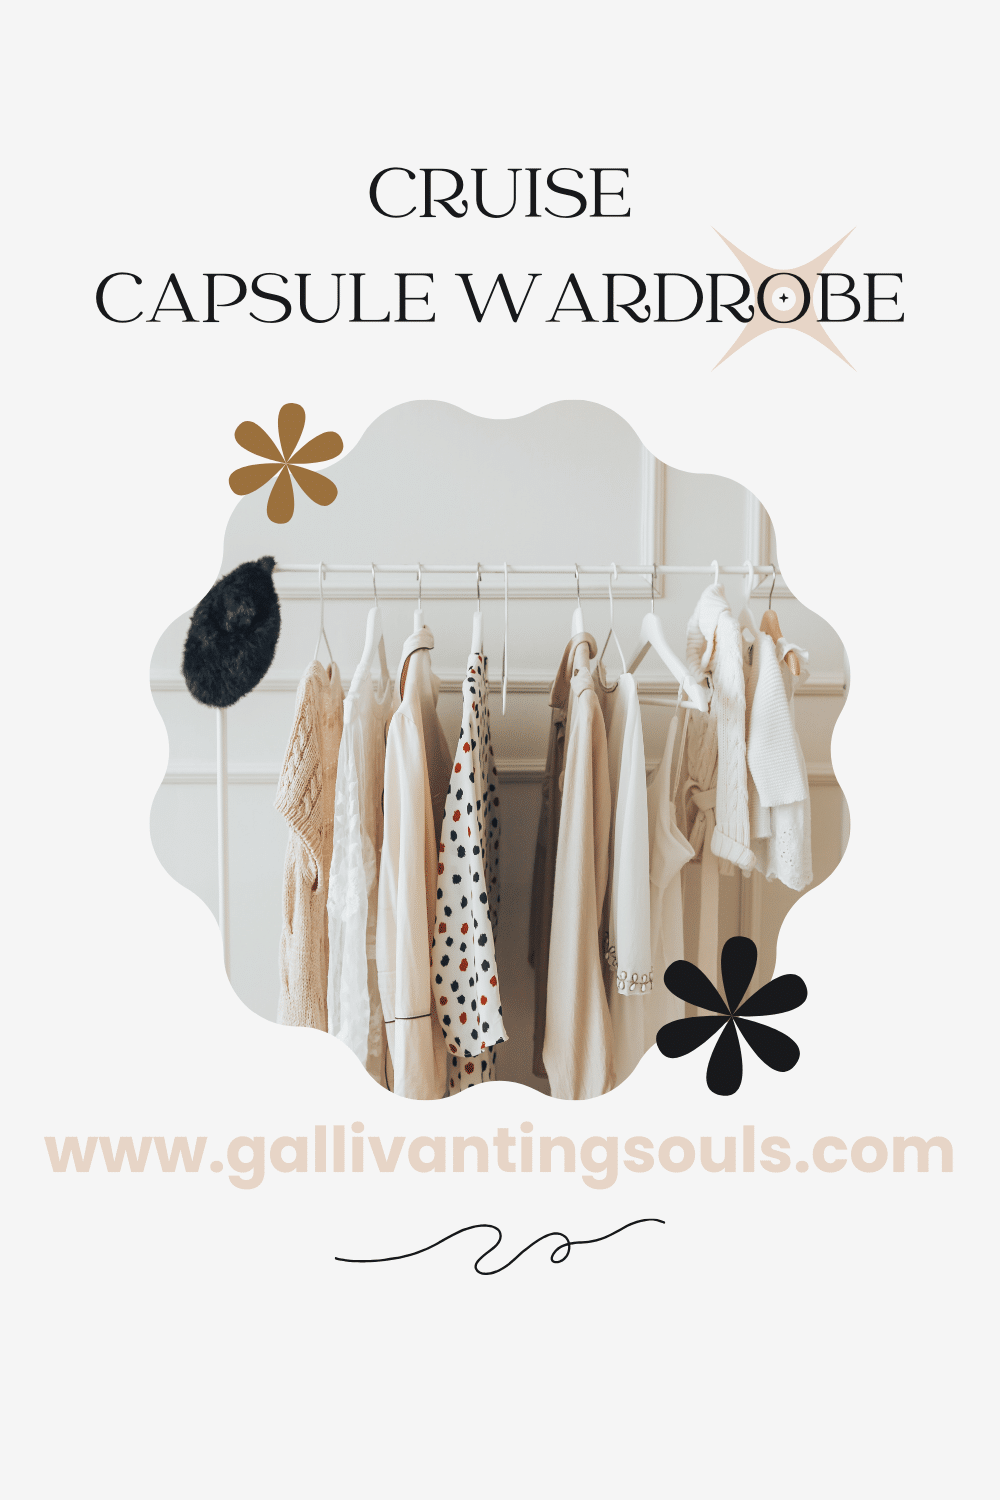 Some ideas on colors for your capsule wardrobe